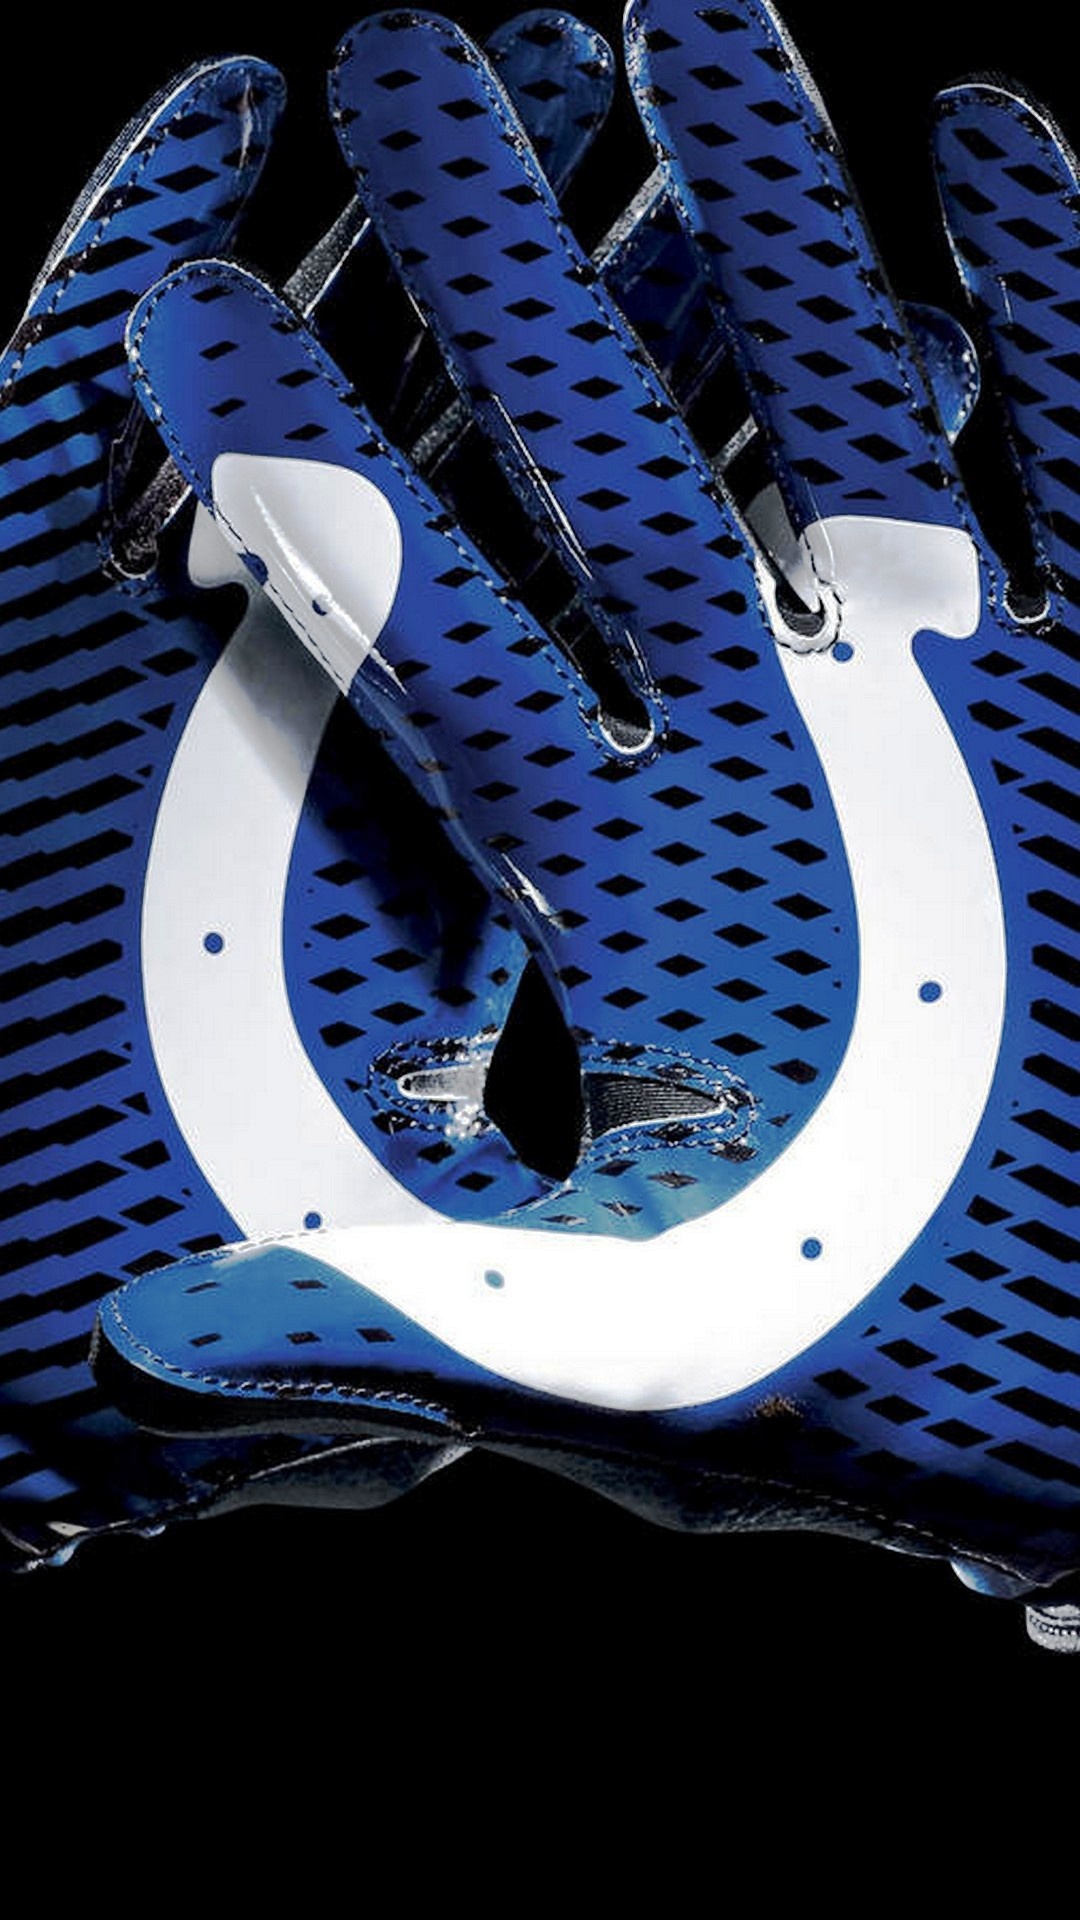 Screensaver iPhone, Indianapolis Colts, NFL iPhone wallpaper, 2022, 1080x1920 Full HD Handy